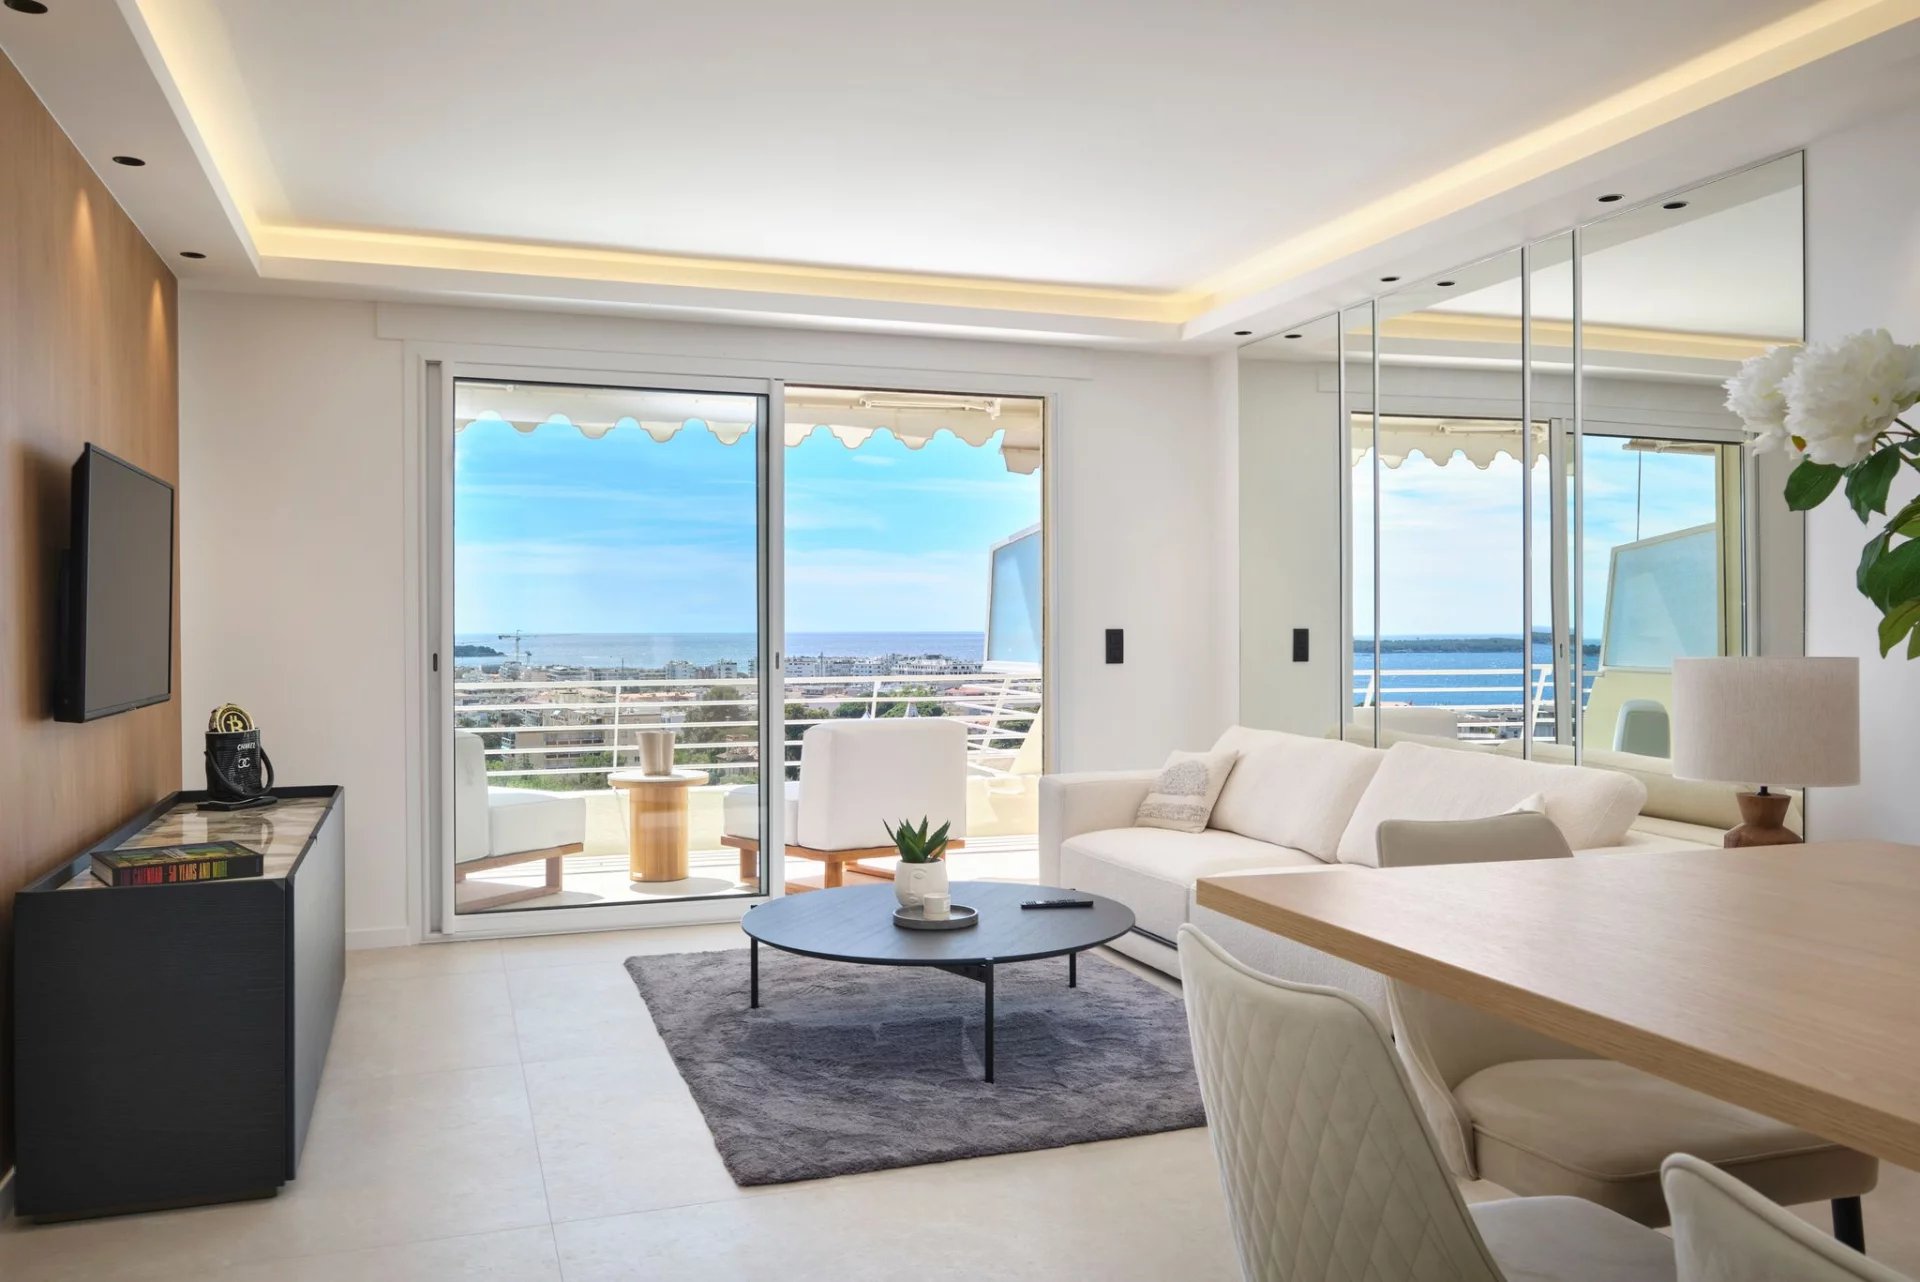 FOR SALE: CANNES 3P 71M² +Ter. PANORAMIC SEA VIEW